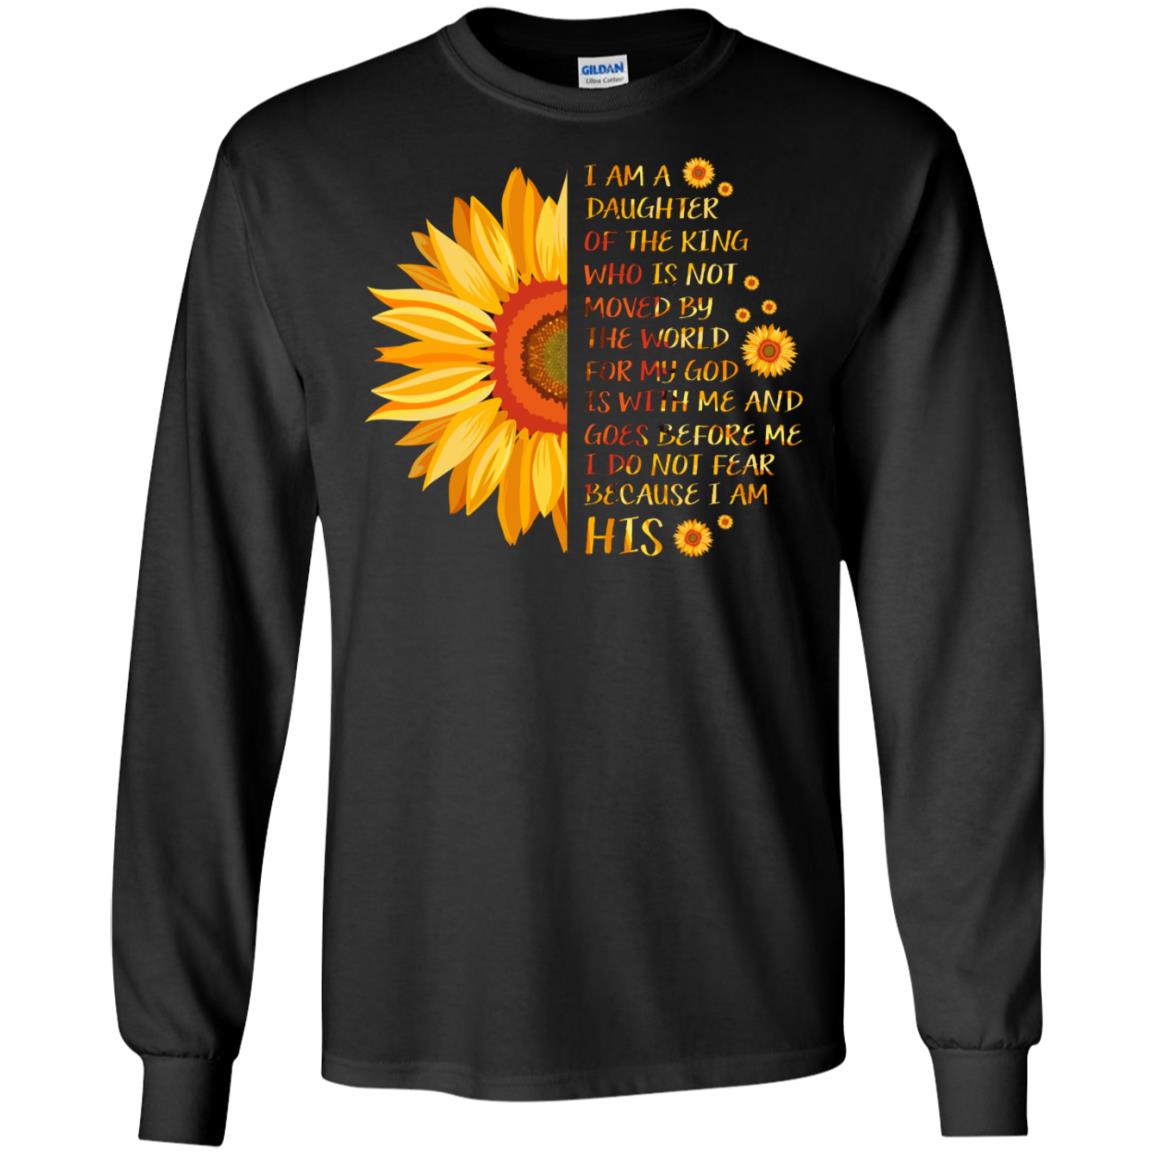 I Am the daughter of A king Who Is Not Moved by The world For My God Is With Me And Goes Before Me I Don't Fear Because i Am hisG240 Gildan LS Ultra Cotton T-Shirt